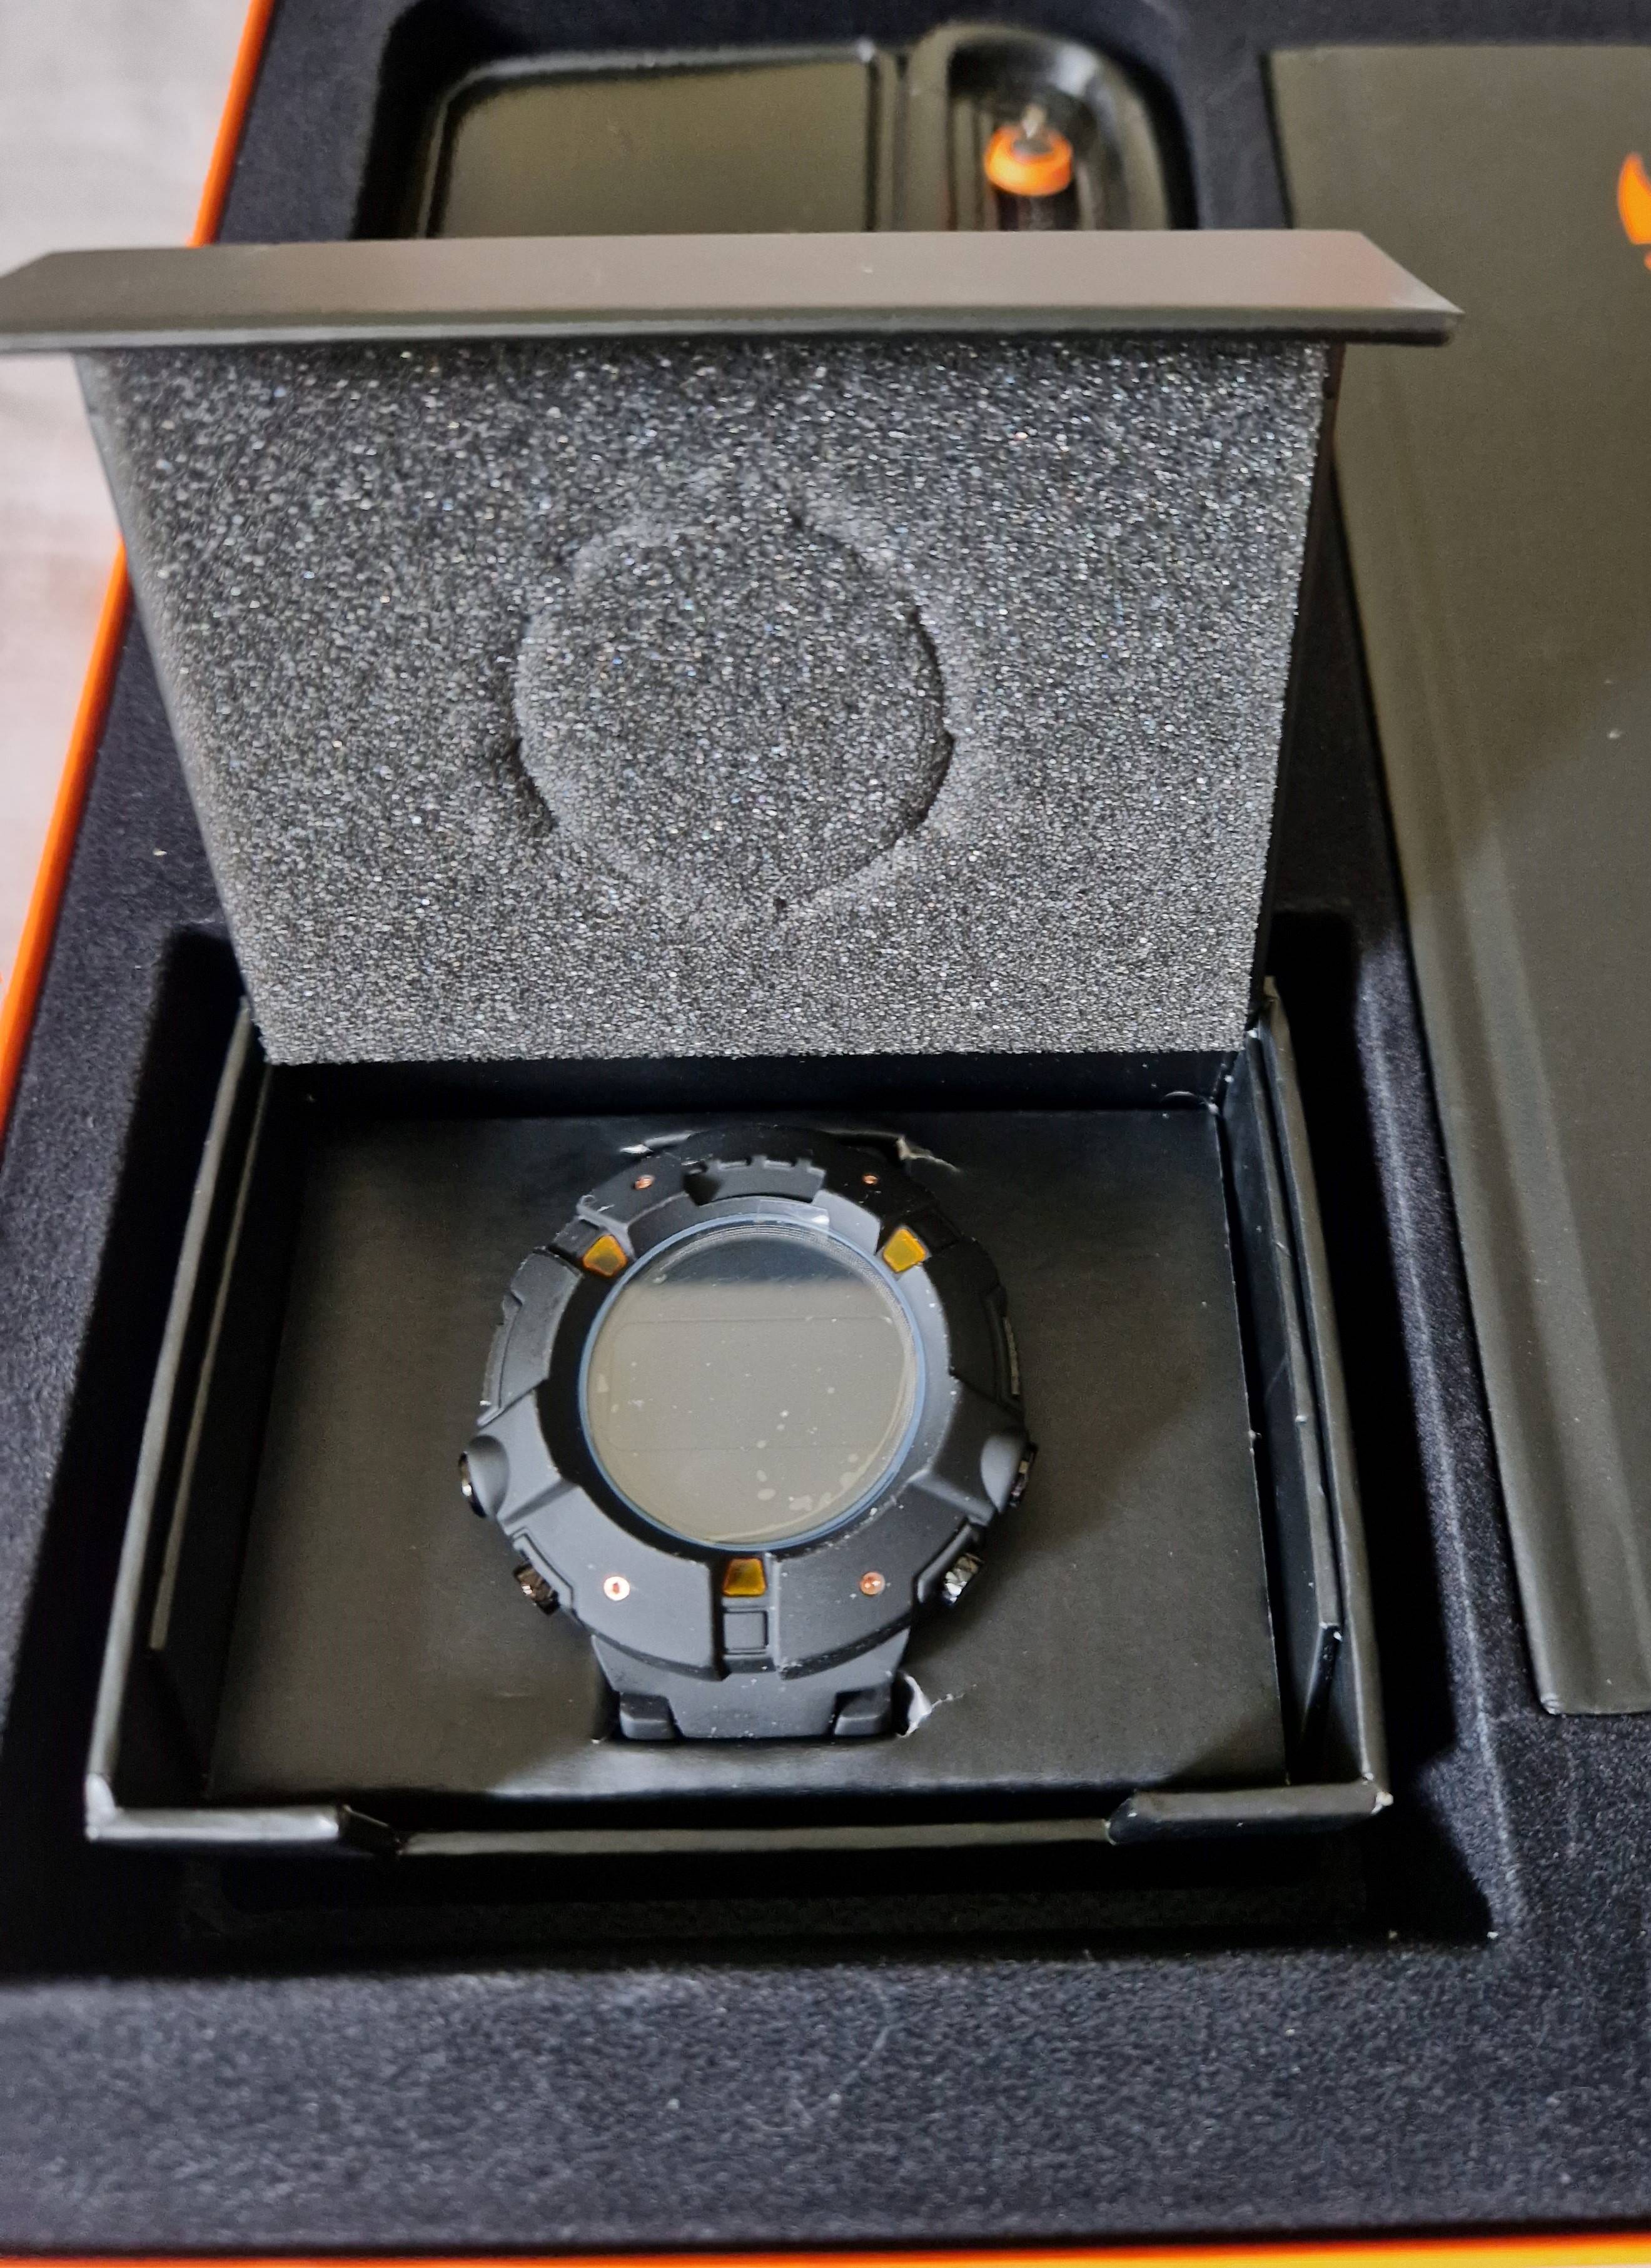 thedivision collectors edition watch.jpg